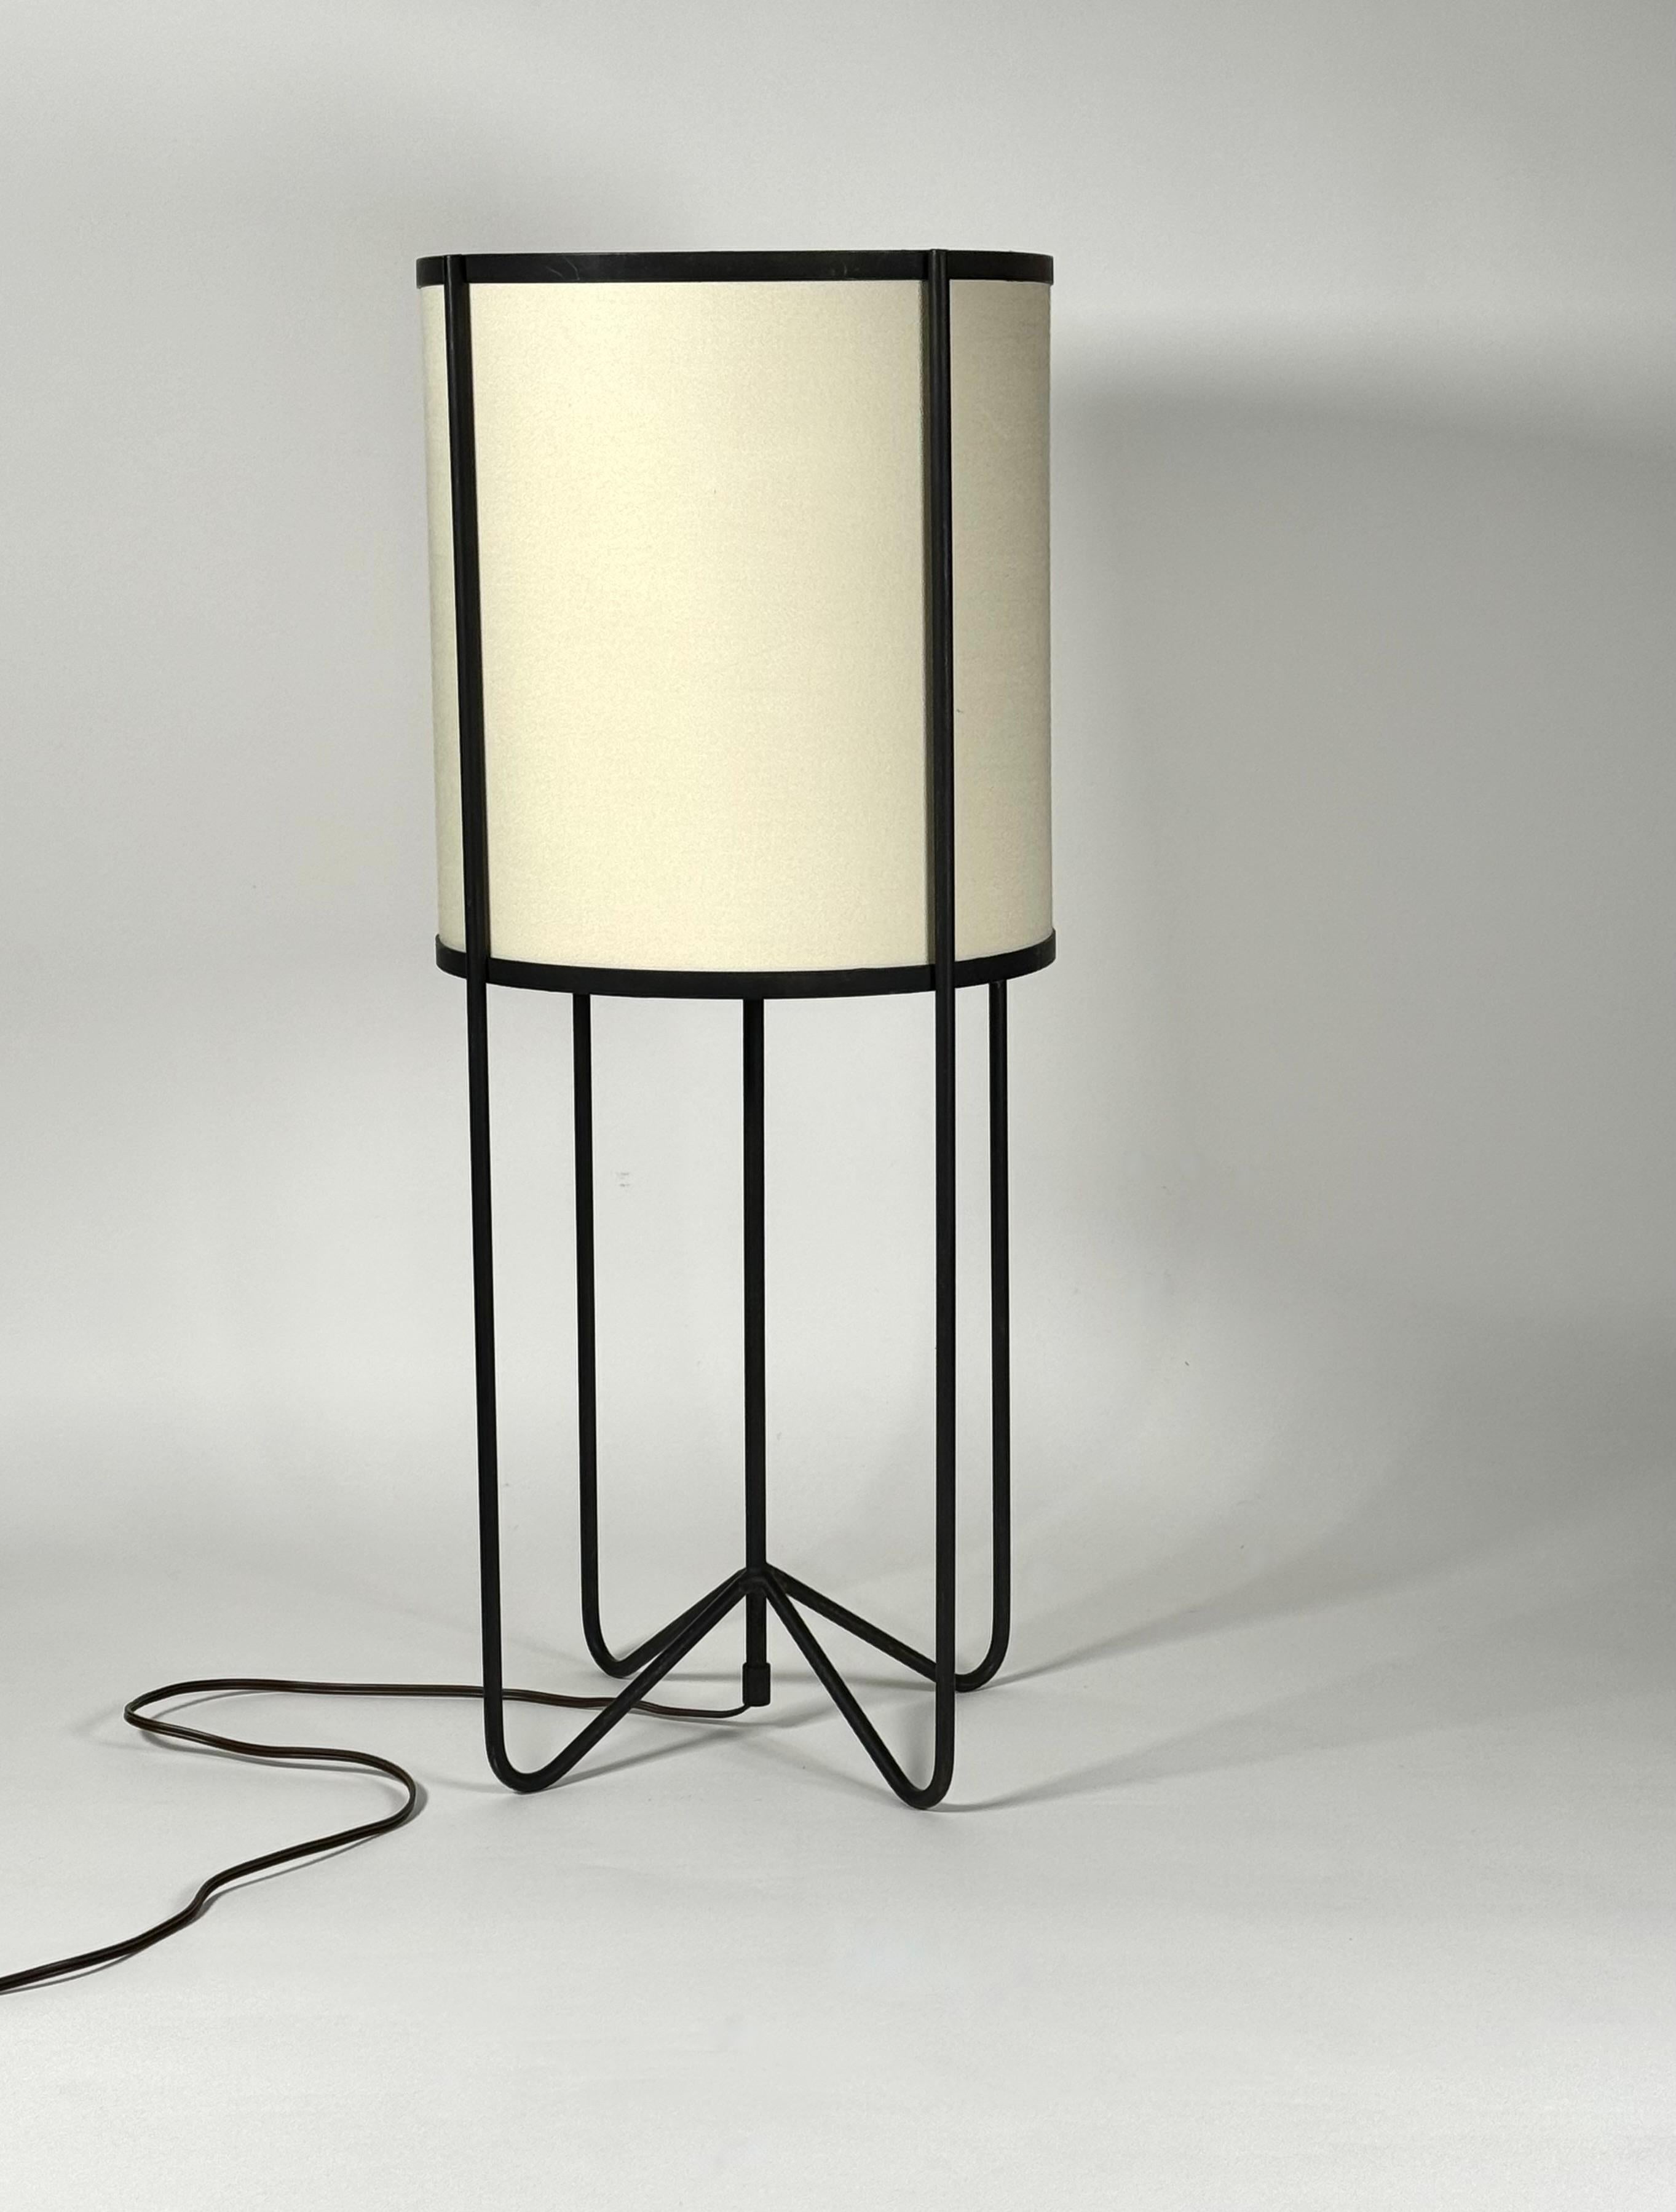 Wrought iron and linen table lamp which embodies the design ethos of the 1950s California Design Lifestyle viewpoint, this design with curved leges and drum shade evokes the connection with the Pacific Rim influence of Japanese culture in Modernist